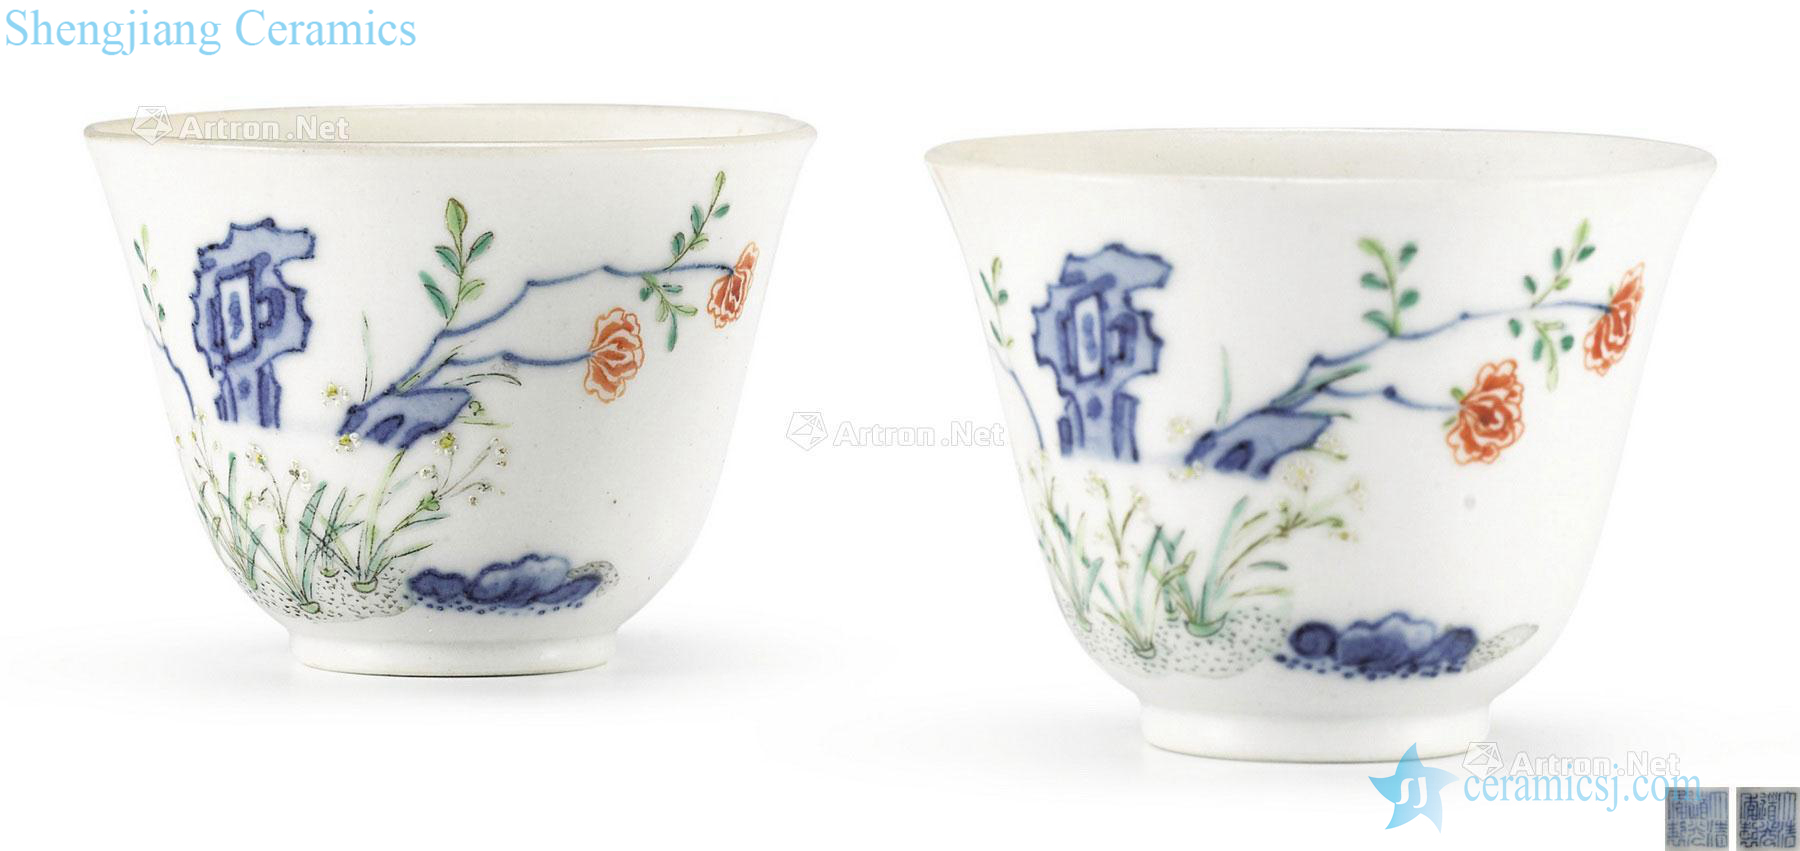 Qing daoguang Colorful daffodils lines (a) small cup